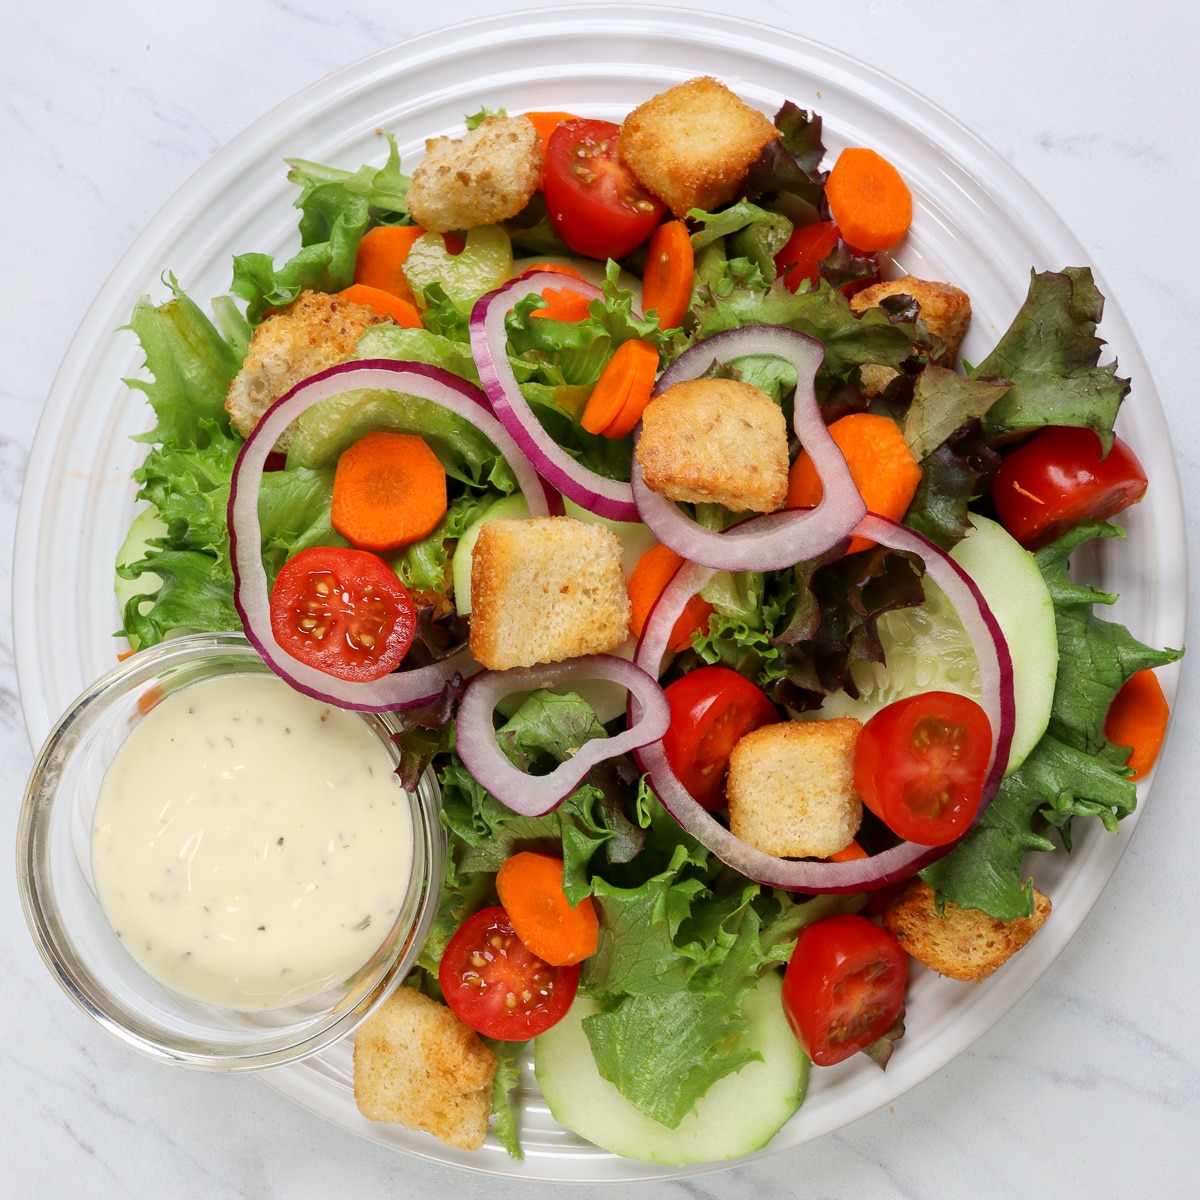 Fresh garden salad with a variety of crisp vegetables and a side dish of creamy ranch dressing.